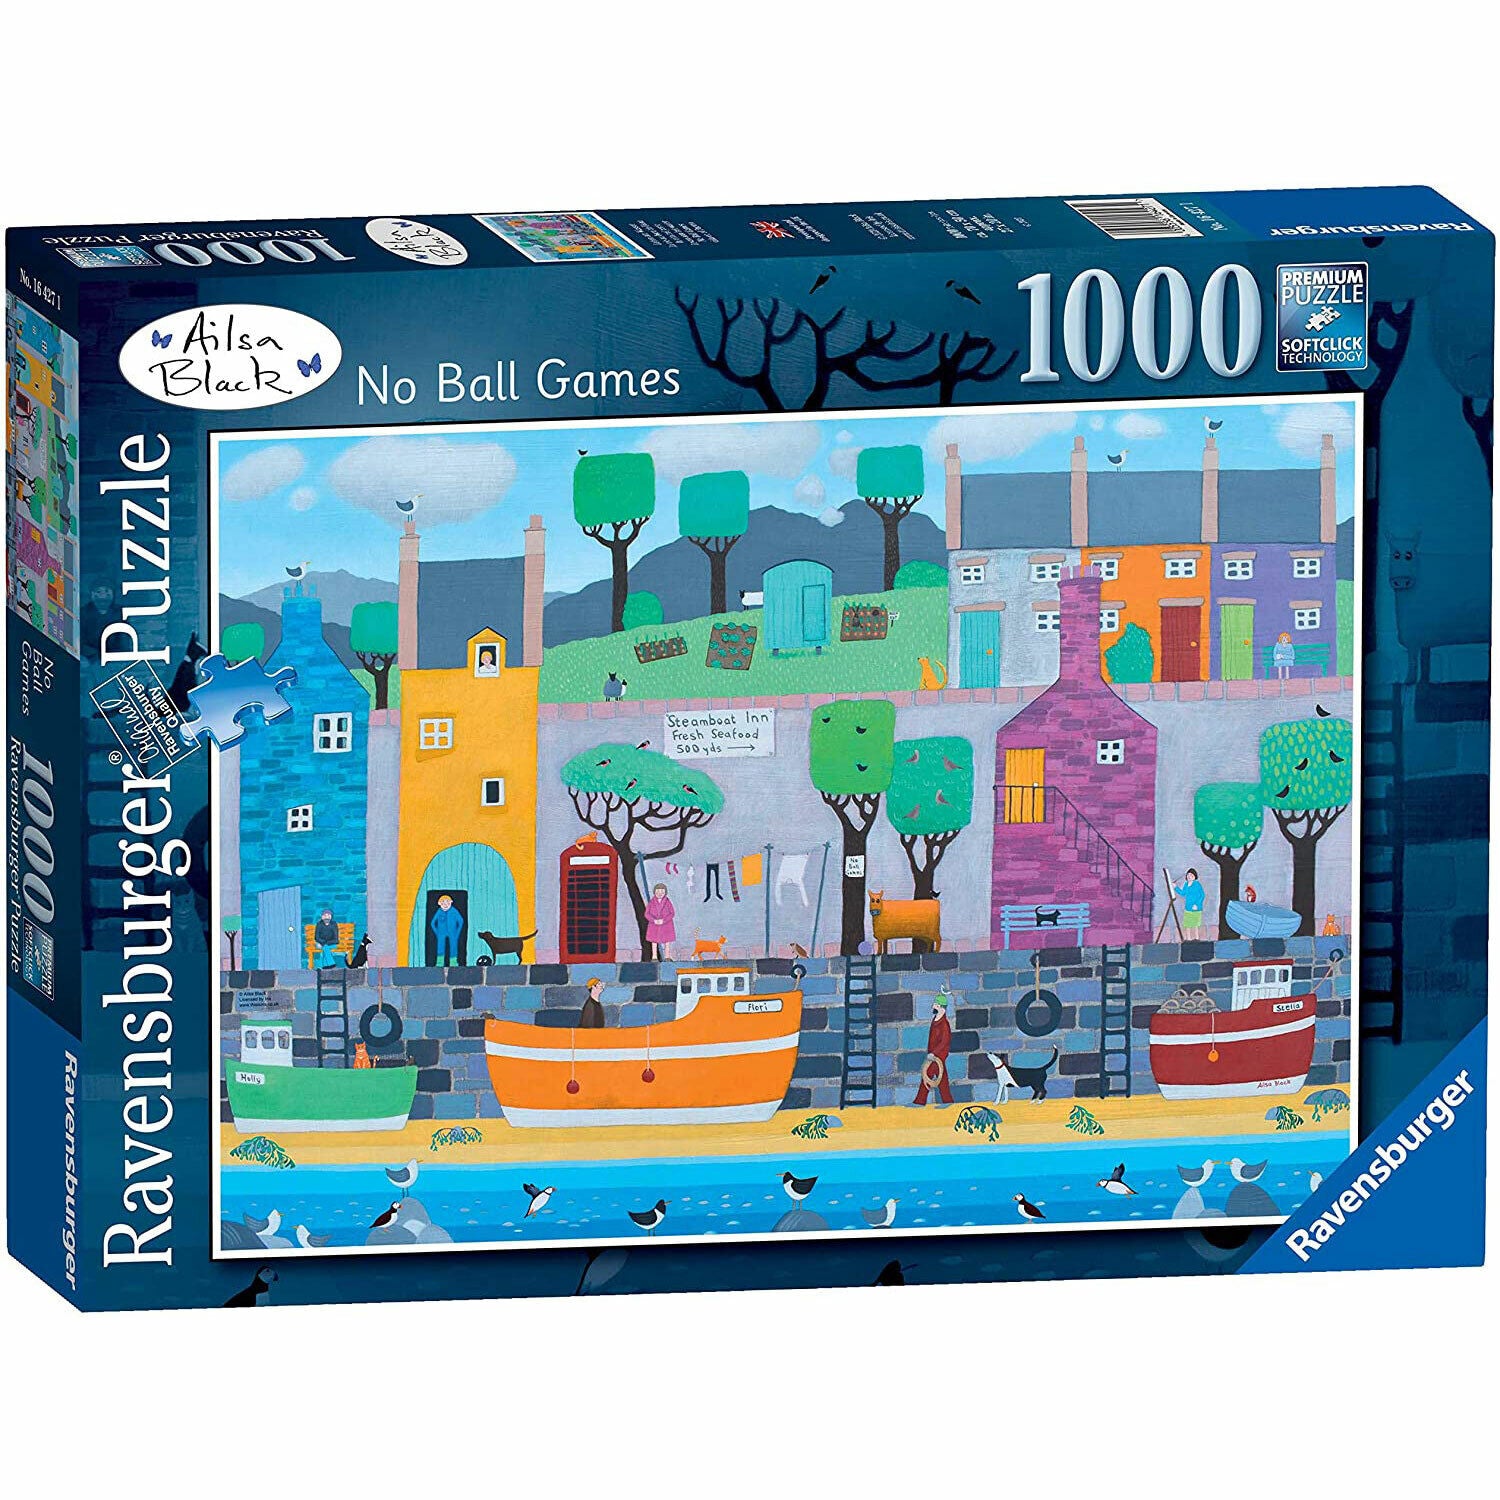 New Ravensburger No Ball Games 1000 Piece Puzzle - Fun Challenge for Adults